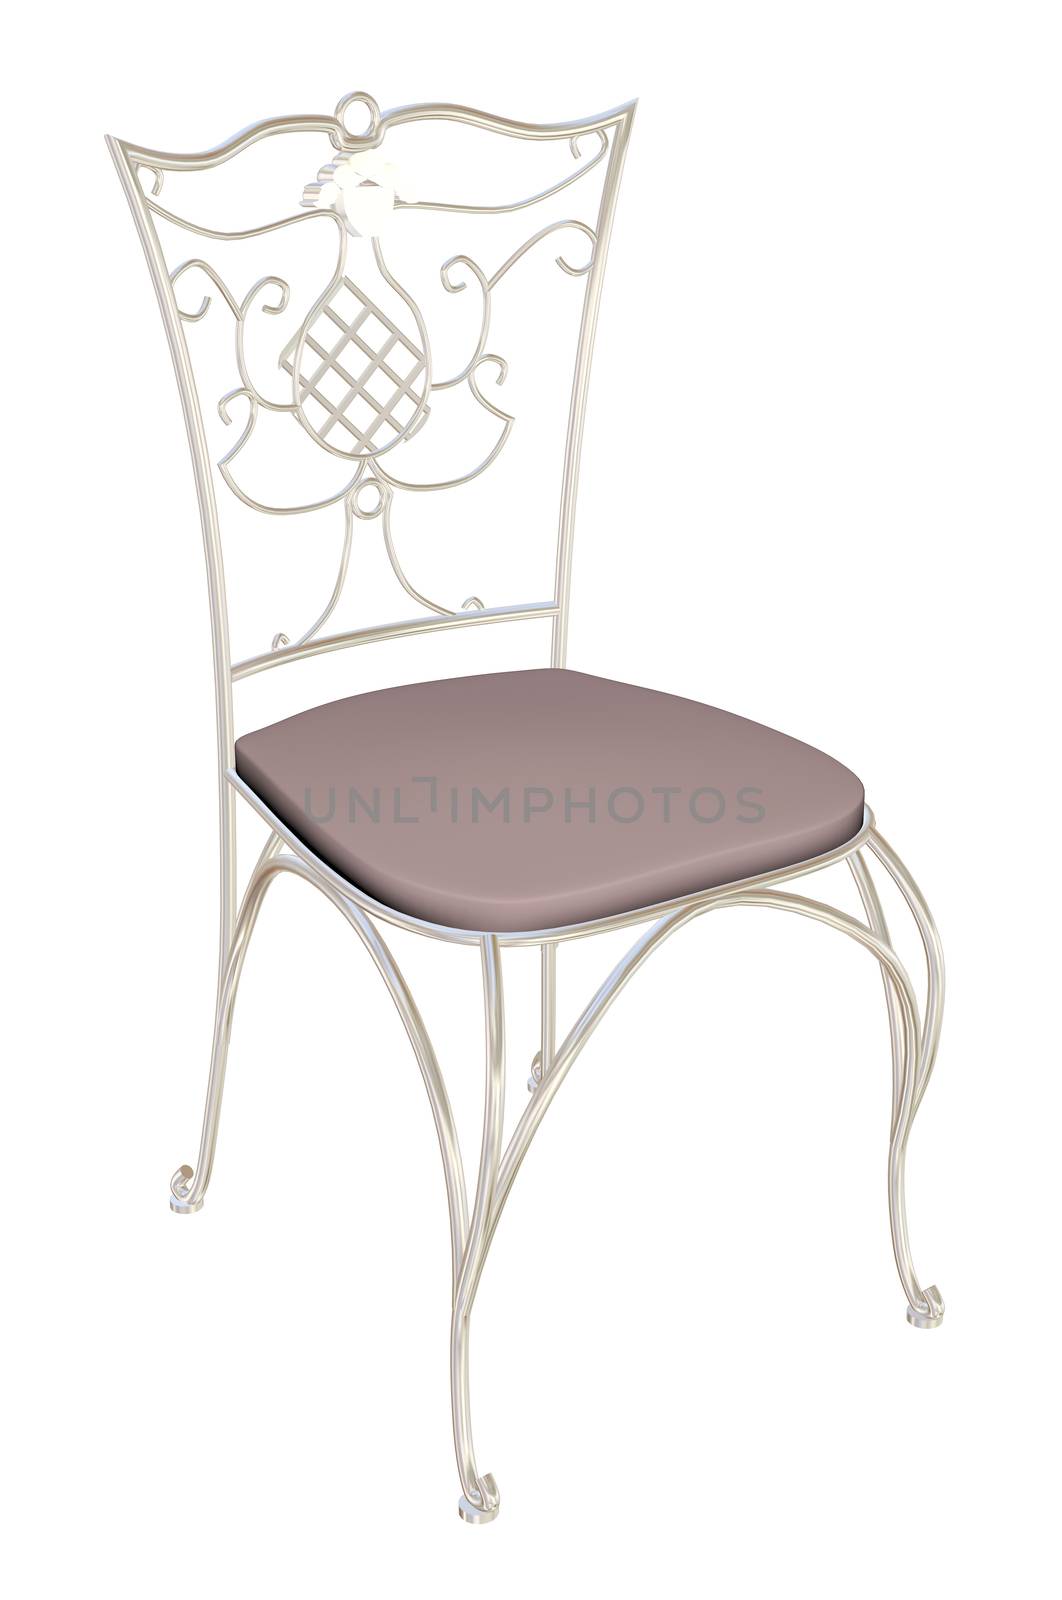 Cast-iron chair with padded seat, gray,  3D illustration, isolated against a white background.